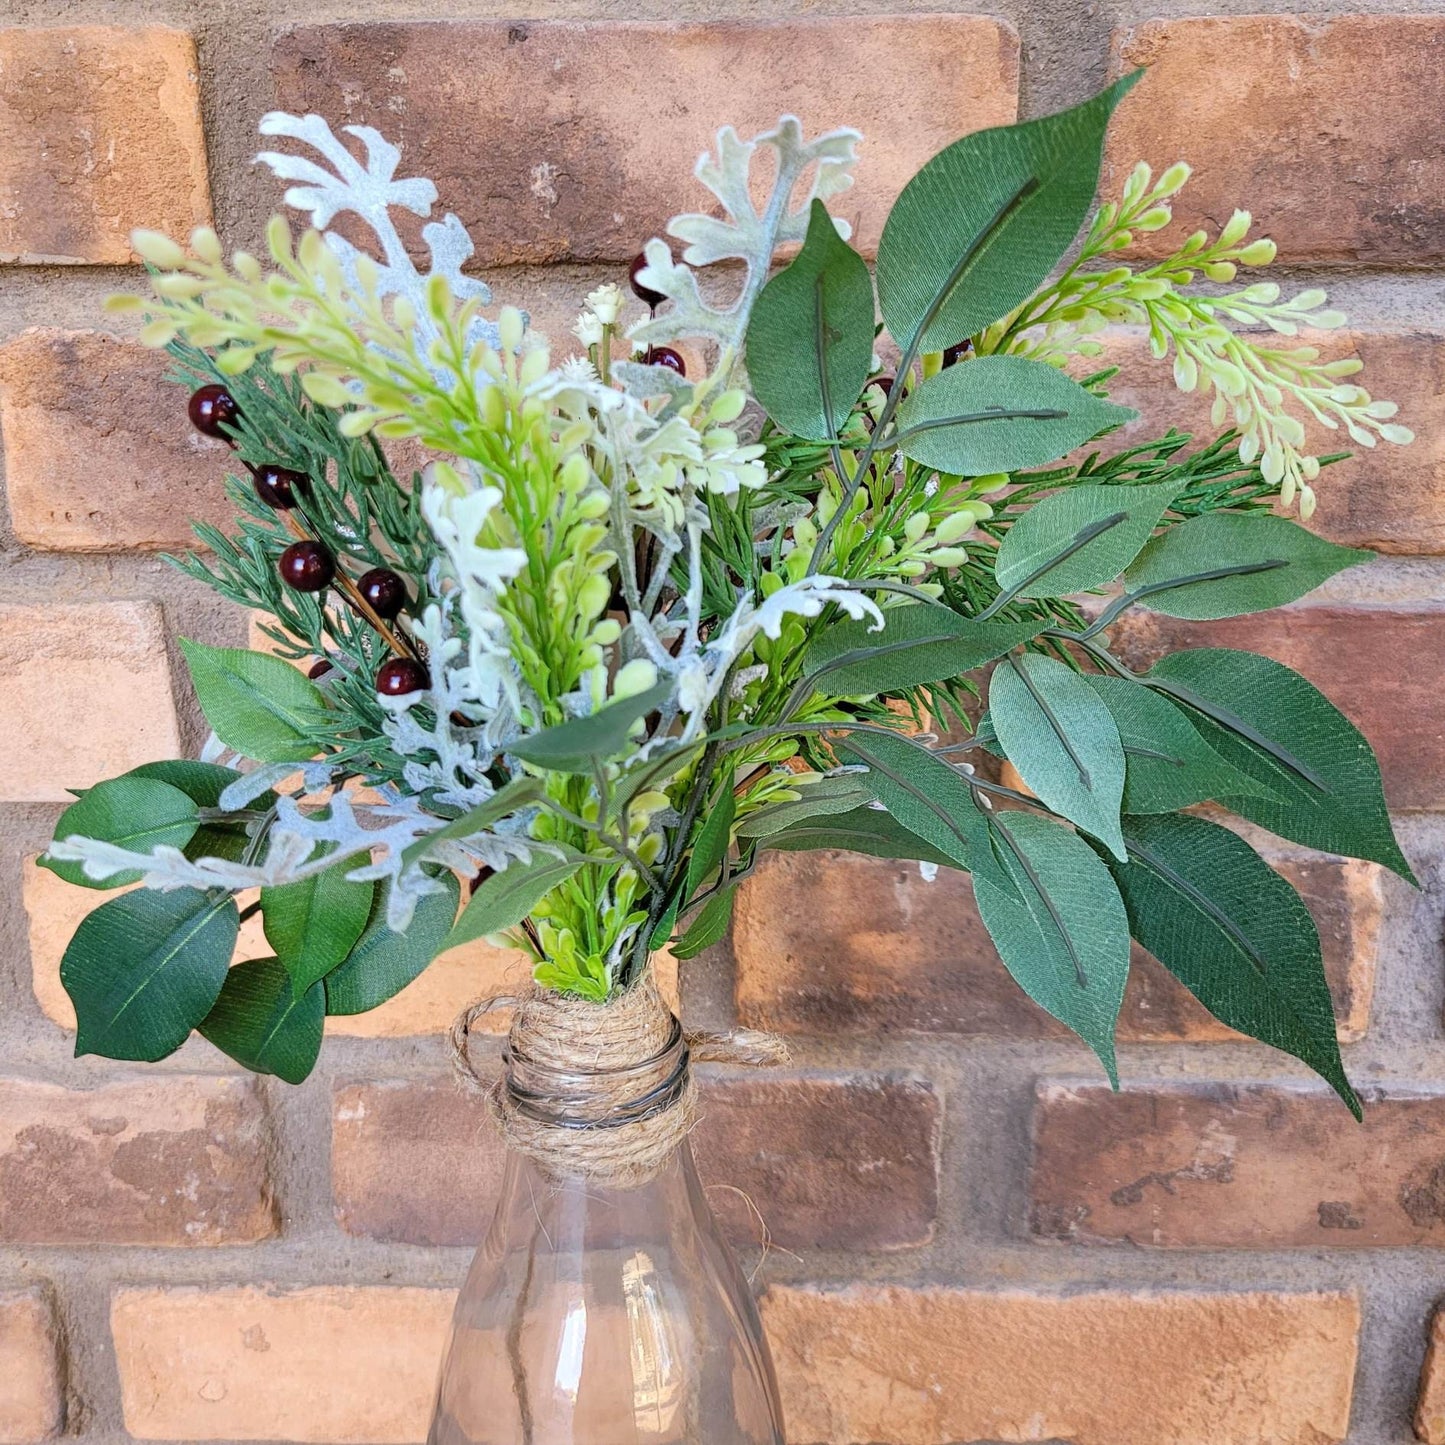 Christmas Wood Flower Arrangement, Christmas Table Centerpiece, Wood Flowers in Vase, Holiday Hostess Gift, Winter Florals